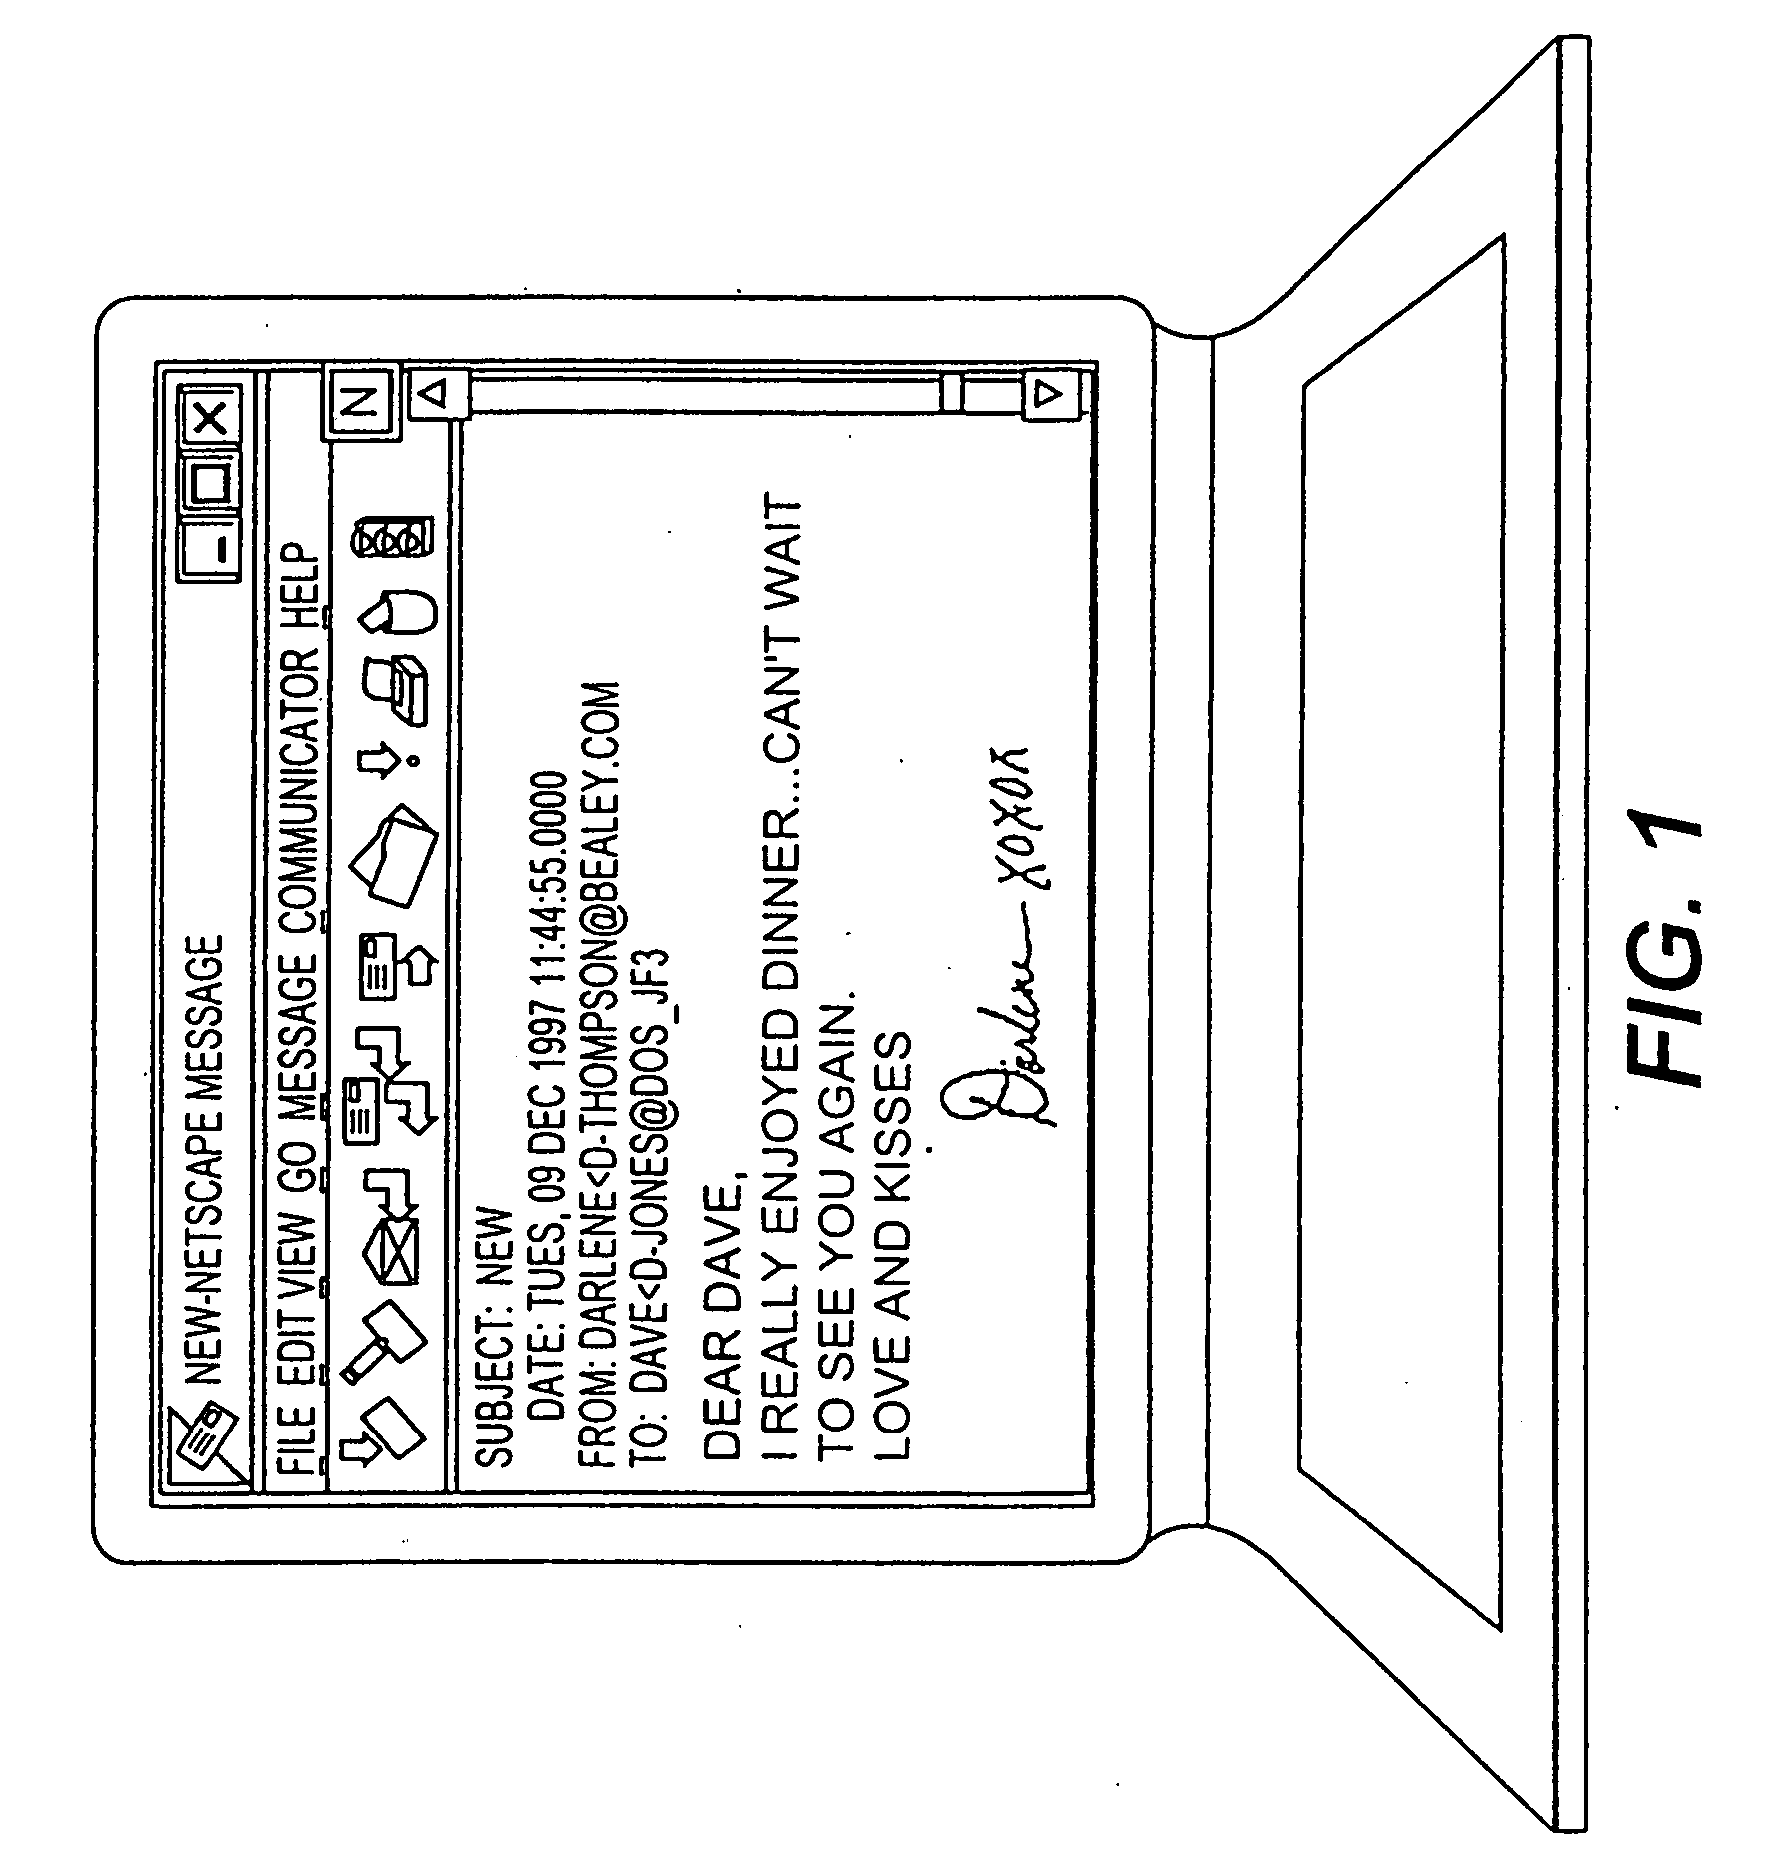 System and method for personalizing electronic mail messages